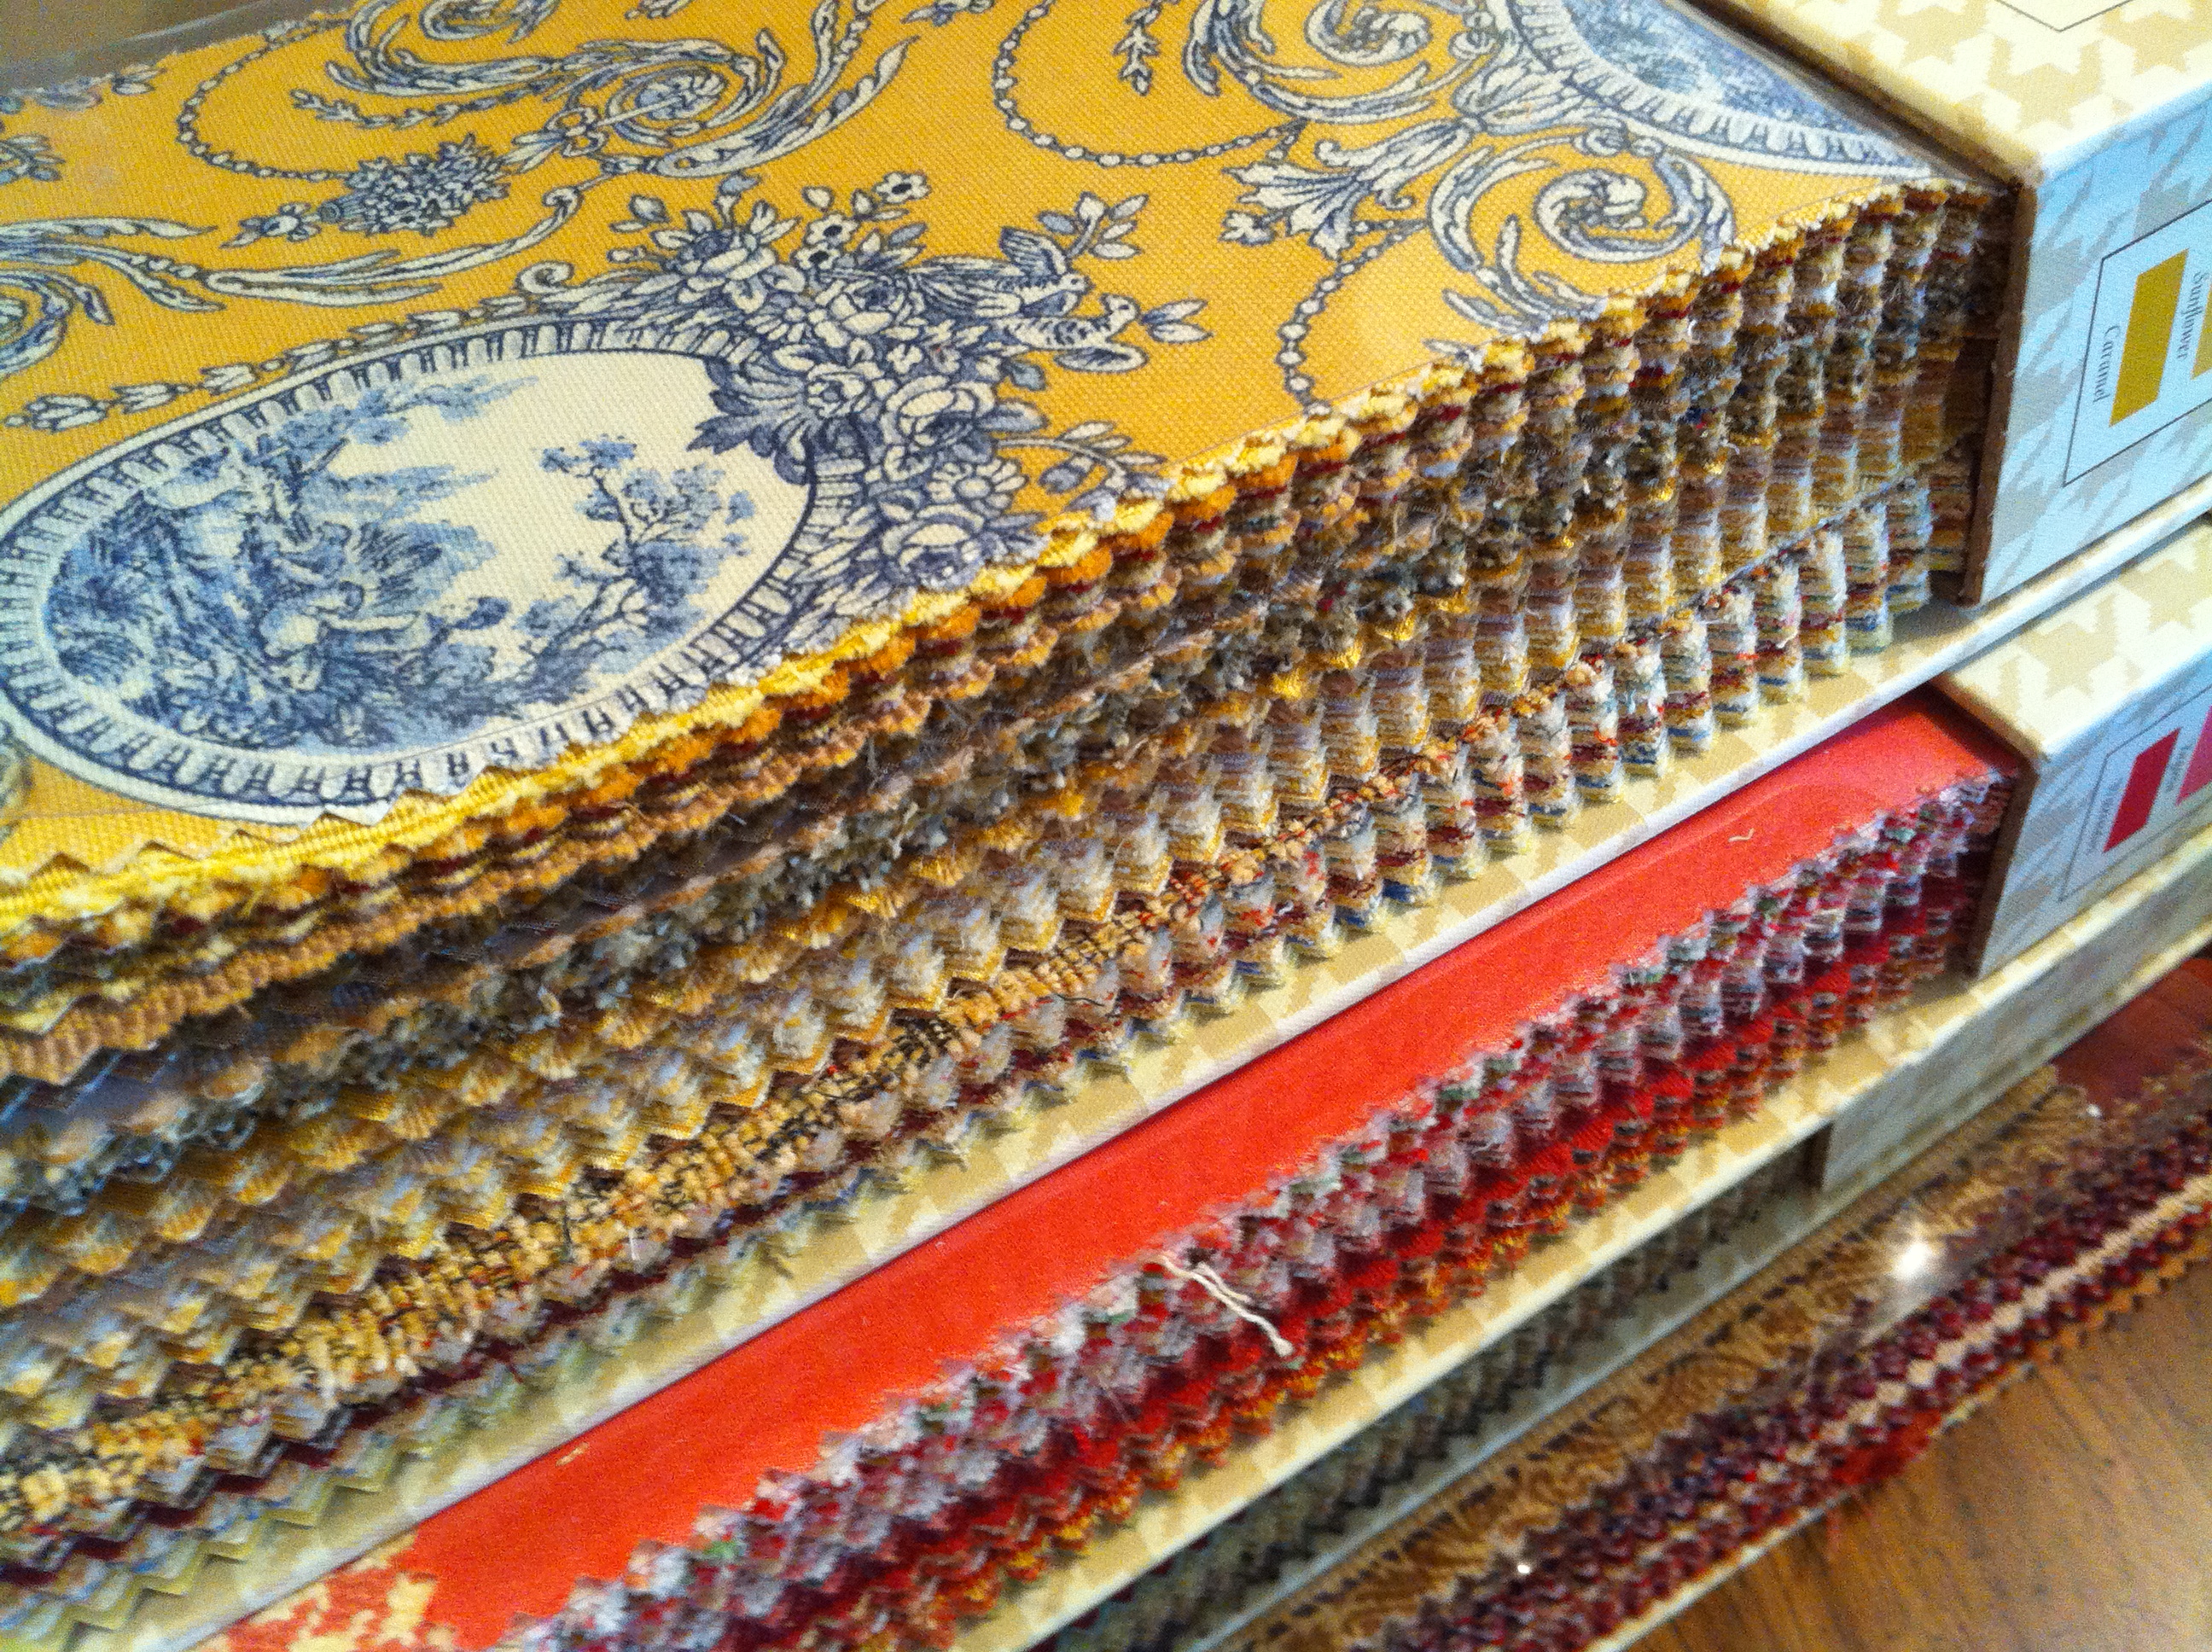 Fabric samples reupholstery